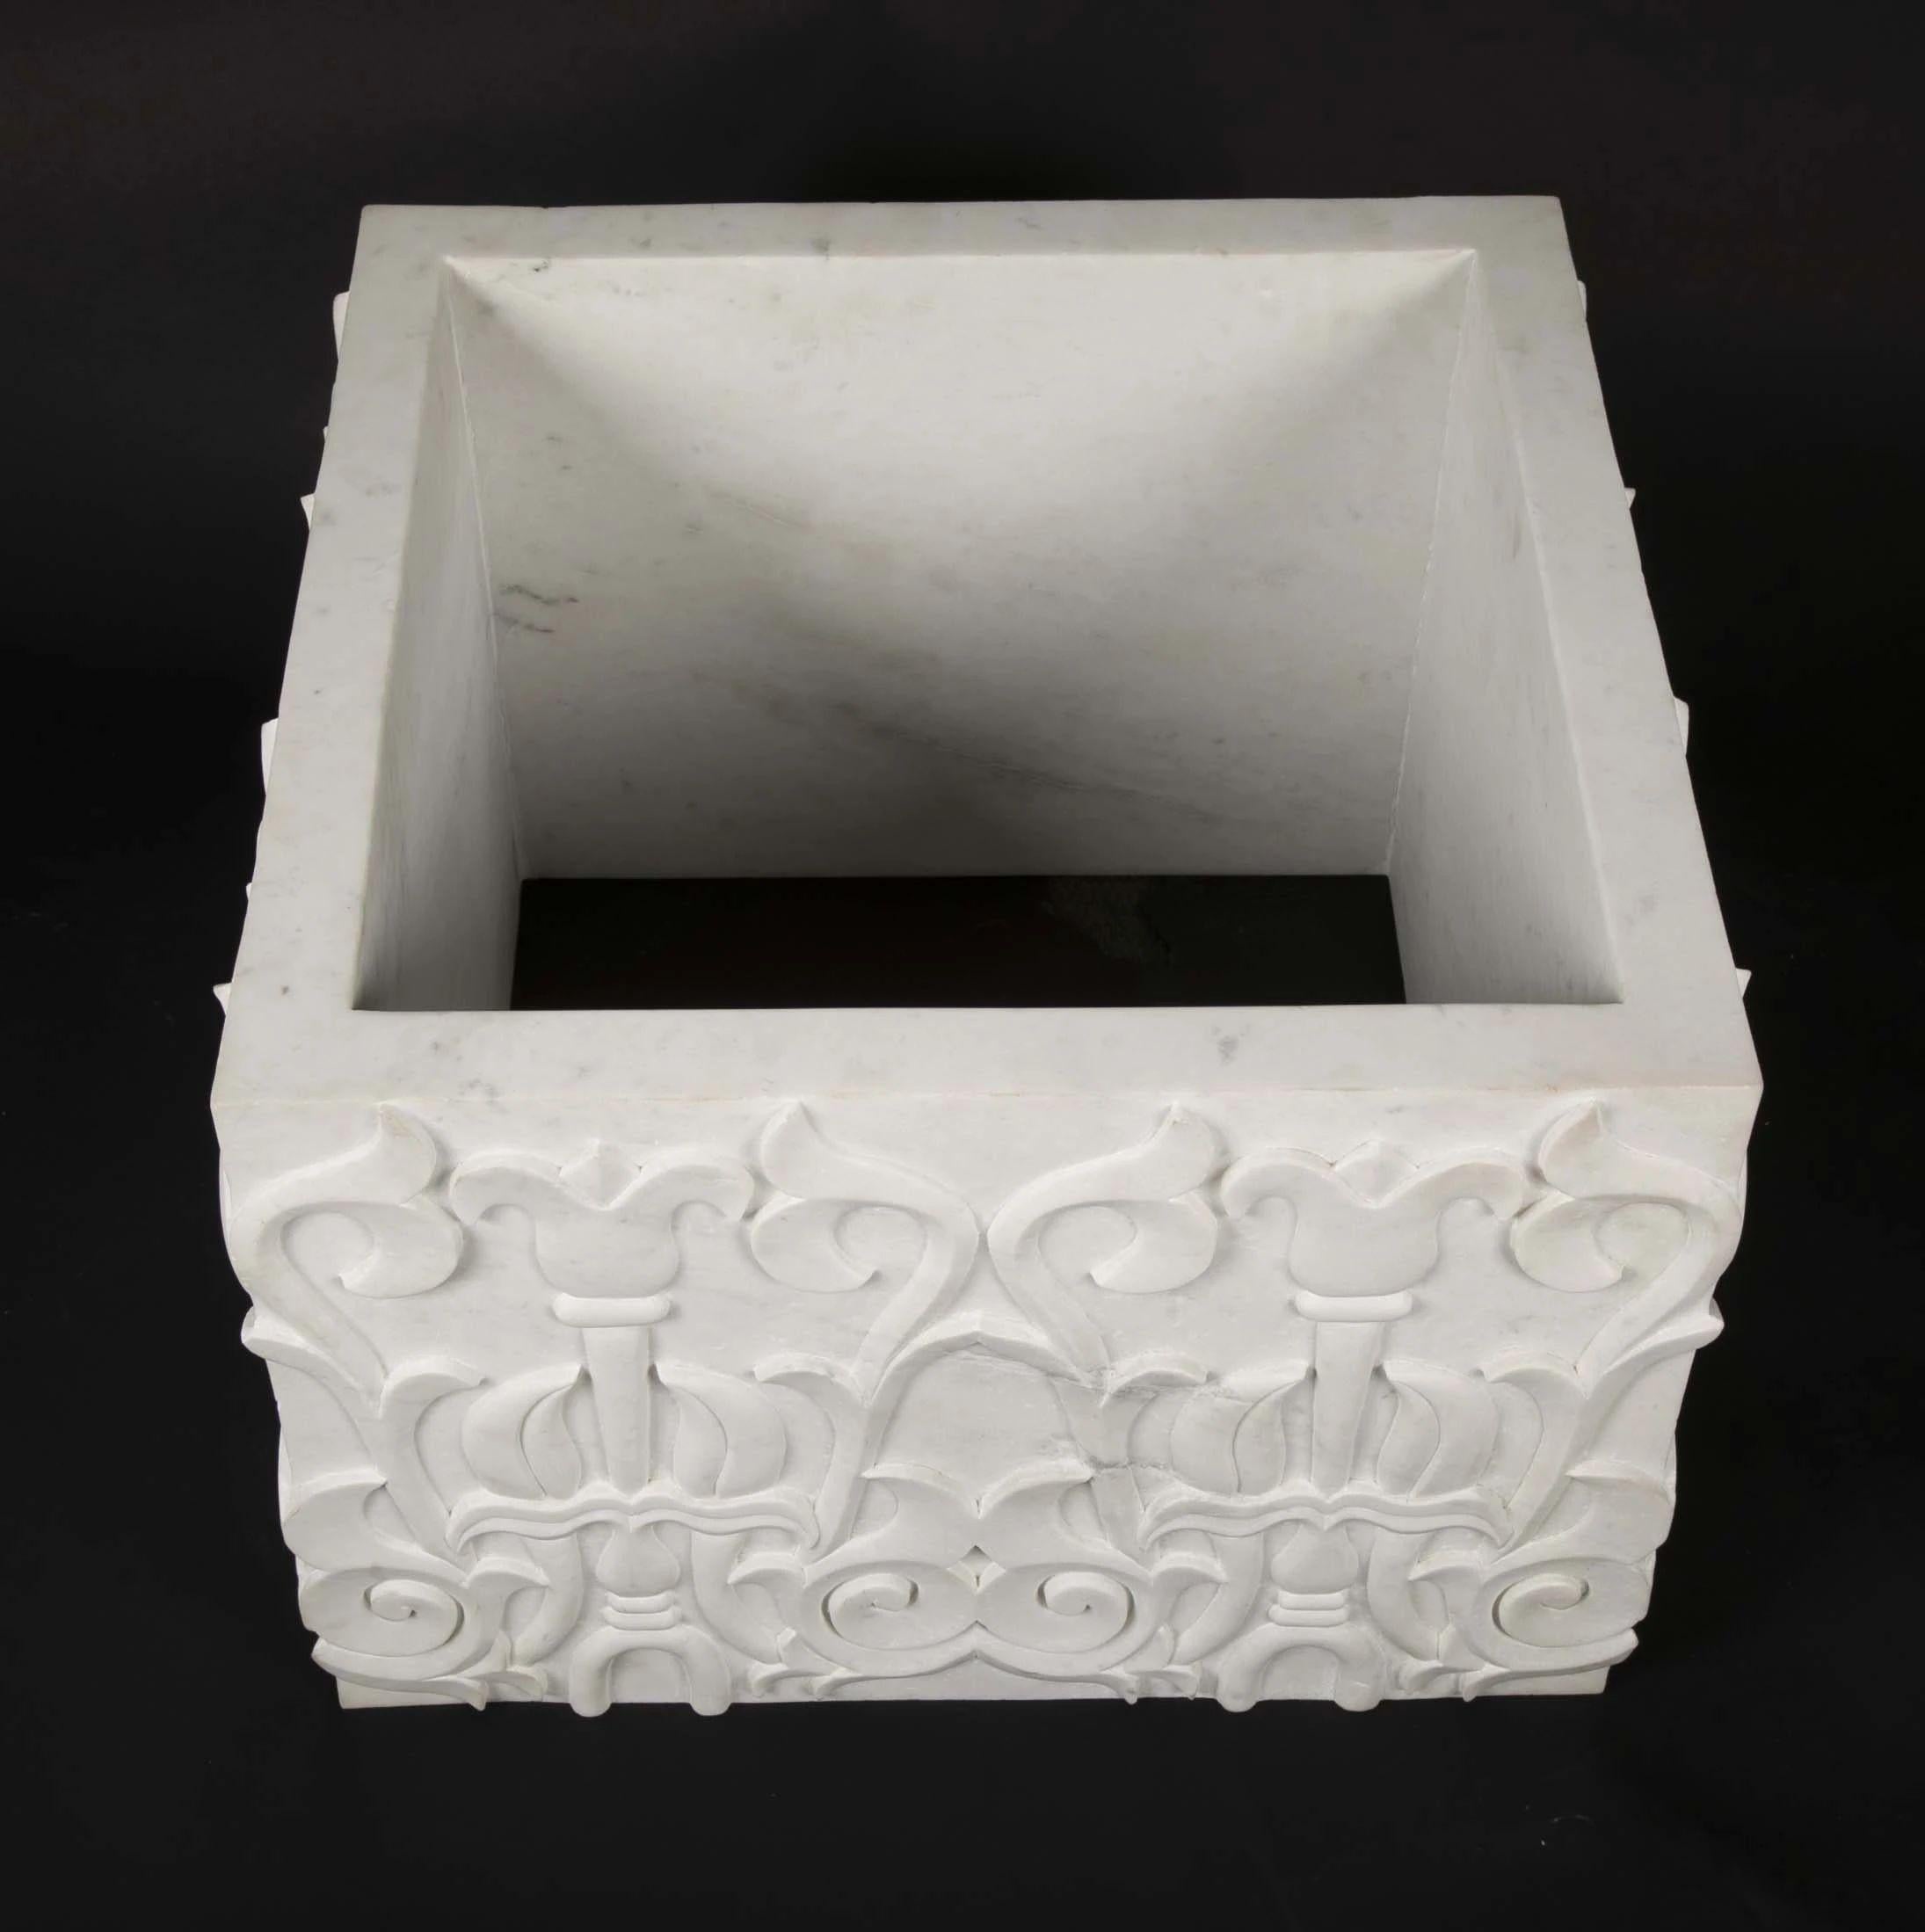 A hand-carved, white marble, square end table base inspired by the tibetan lotus motif. Works perfectly with a glass top.


Hand Carved Lotus Marble Table Base
Size- 23.5